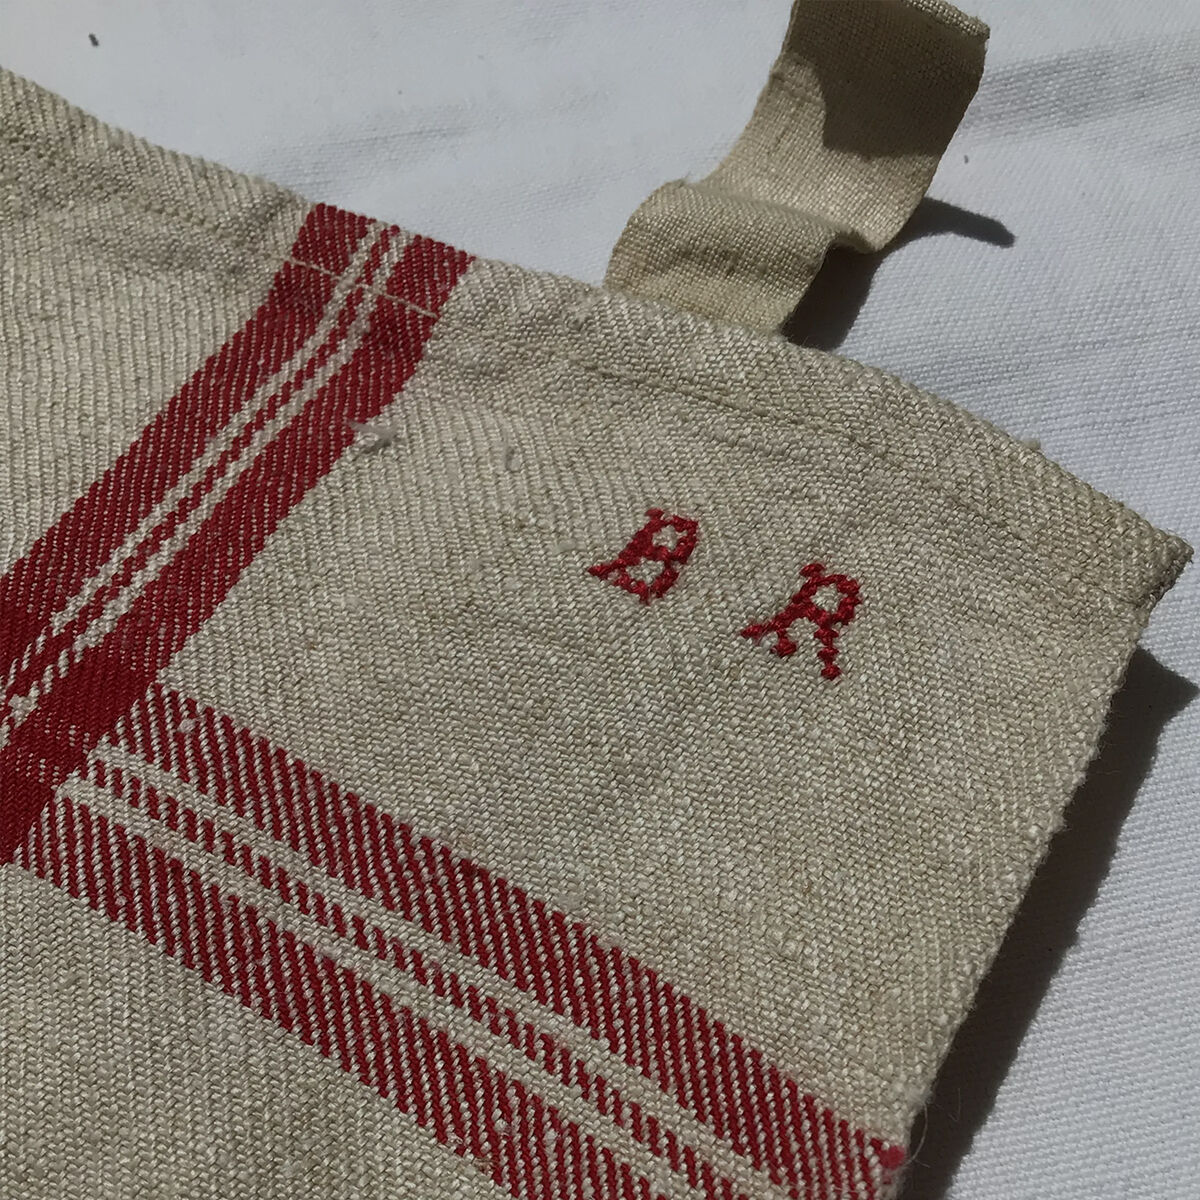 EMBROIDERED TEA TOWELS